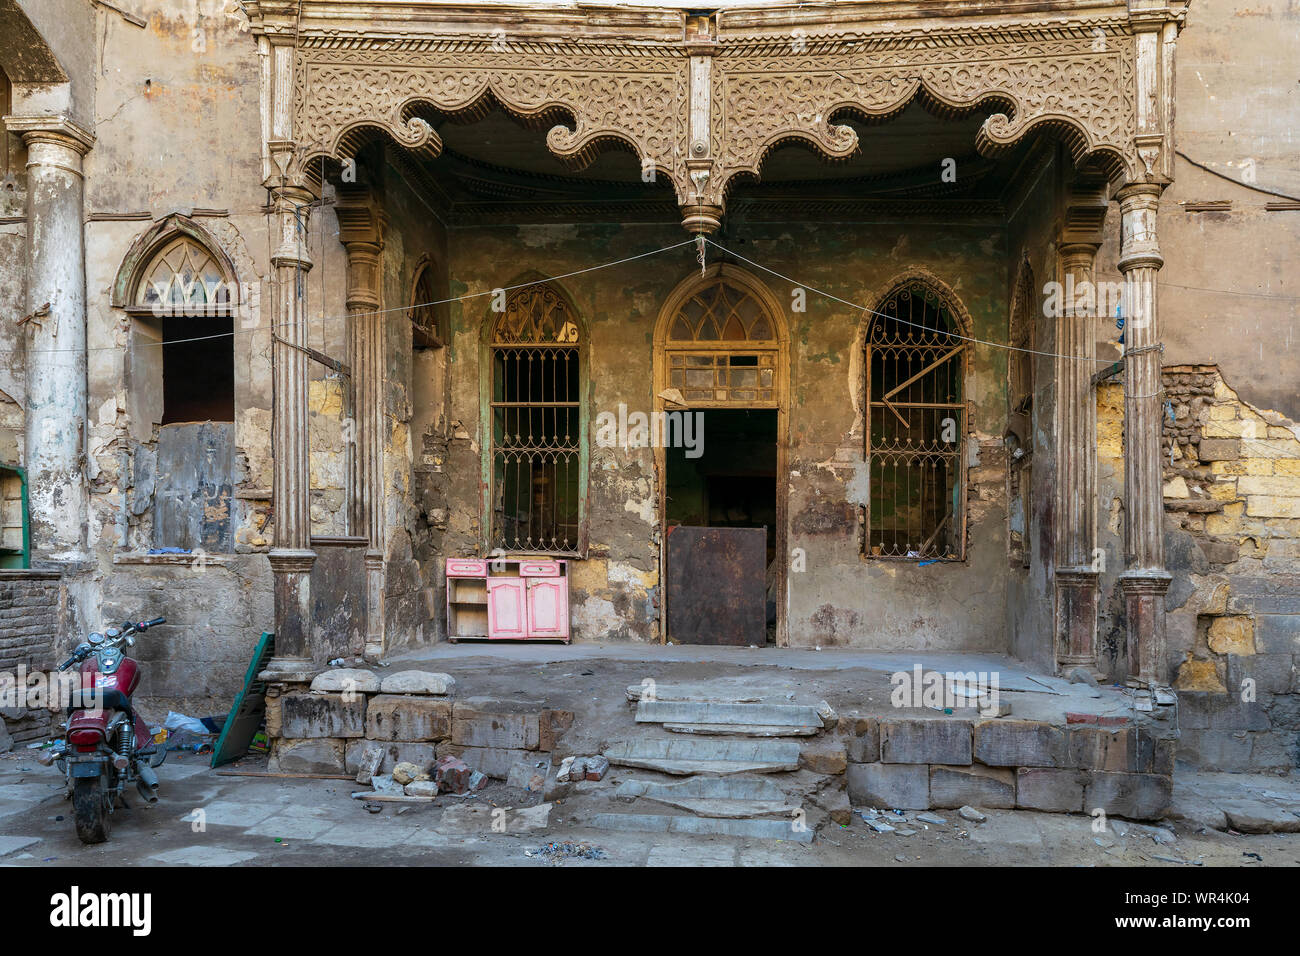 Cairo, Egypt- January 16 2016: Facade of Bayt Madkour Pasha historic abandoned house located at Souq Al Selah Street, Darb Al Ahmar district, Old Cairo Stock Photo